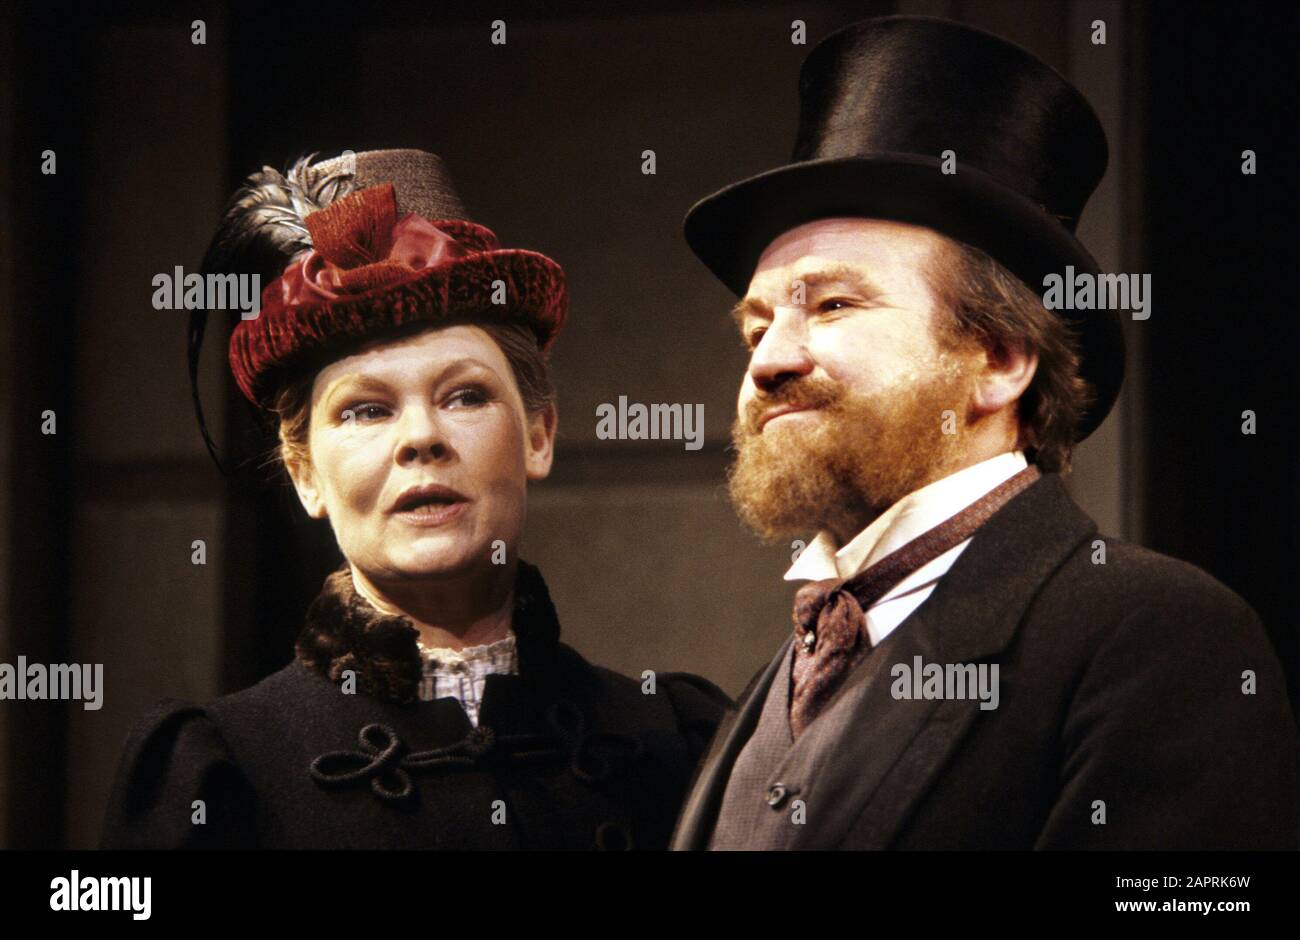 Judi Dench and Michael Williams as Carrie and Charles Pooter in MR & MRS NOBODY by Keith Waterhouse adapted from the novel 'The Diary of a Nobody' by George & Weedon Grossmith directed by Ned Sherrin at the Garrick Theatre, London in 1986. Dame Judith Olivia Dench CH DBE FRSA, born 1934. Married to the actor Michael Williams from 1971 until his death in 2001. They had one daughter, the actress Finty Williams, born in 1972. Stock Photo